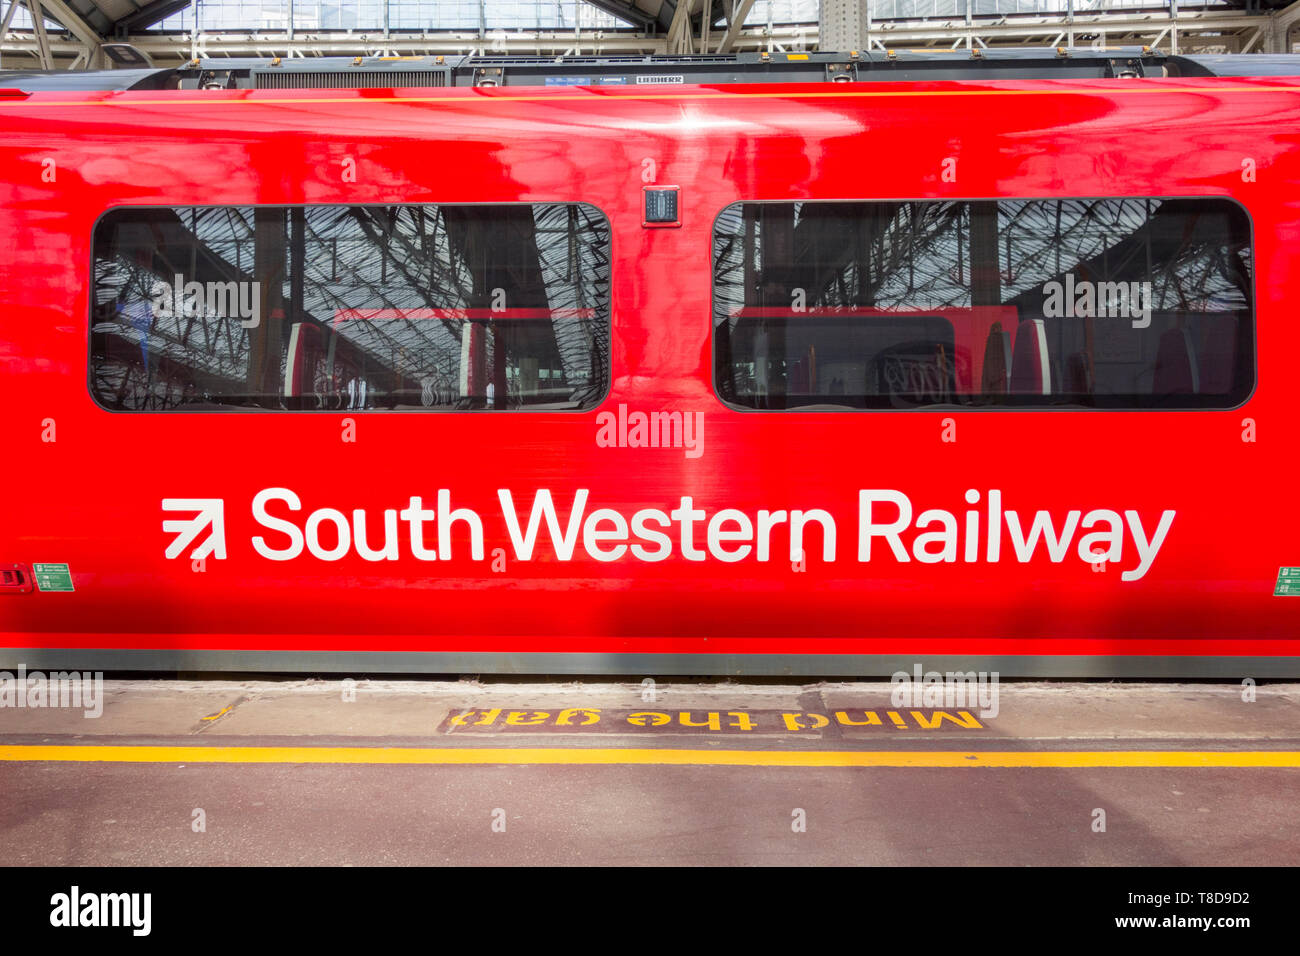 South Western Railway carriages and livery at London Waterloo, UK Stock Photo